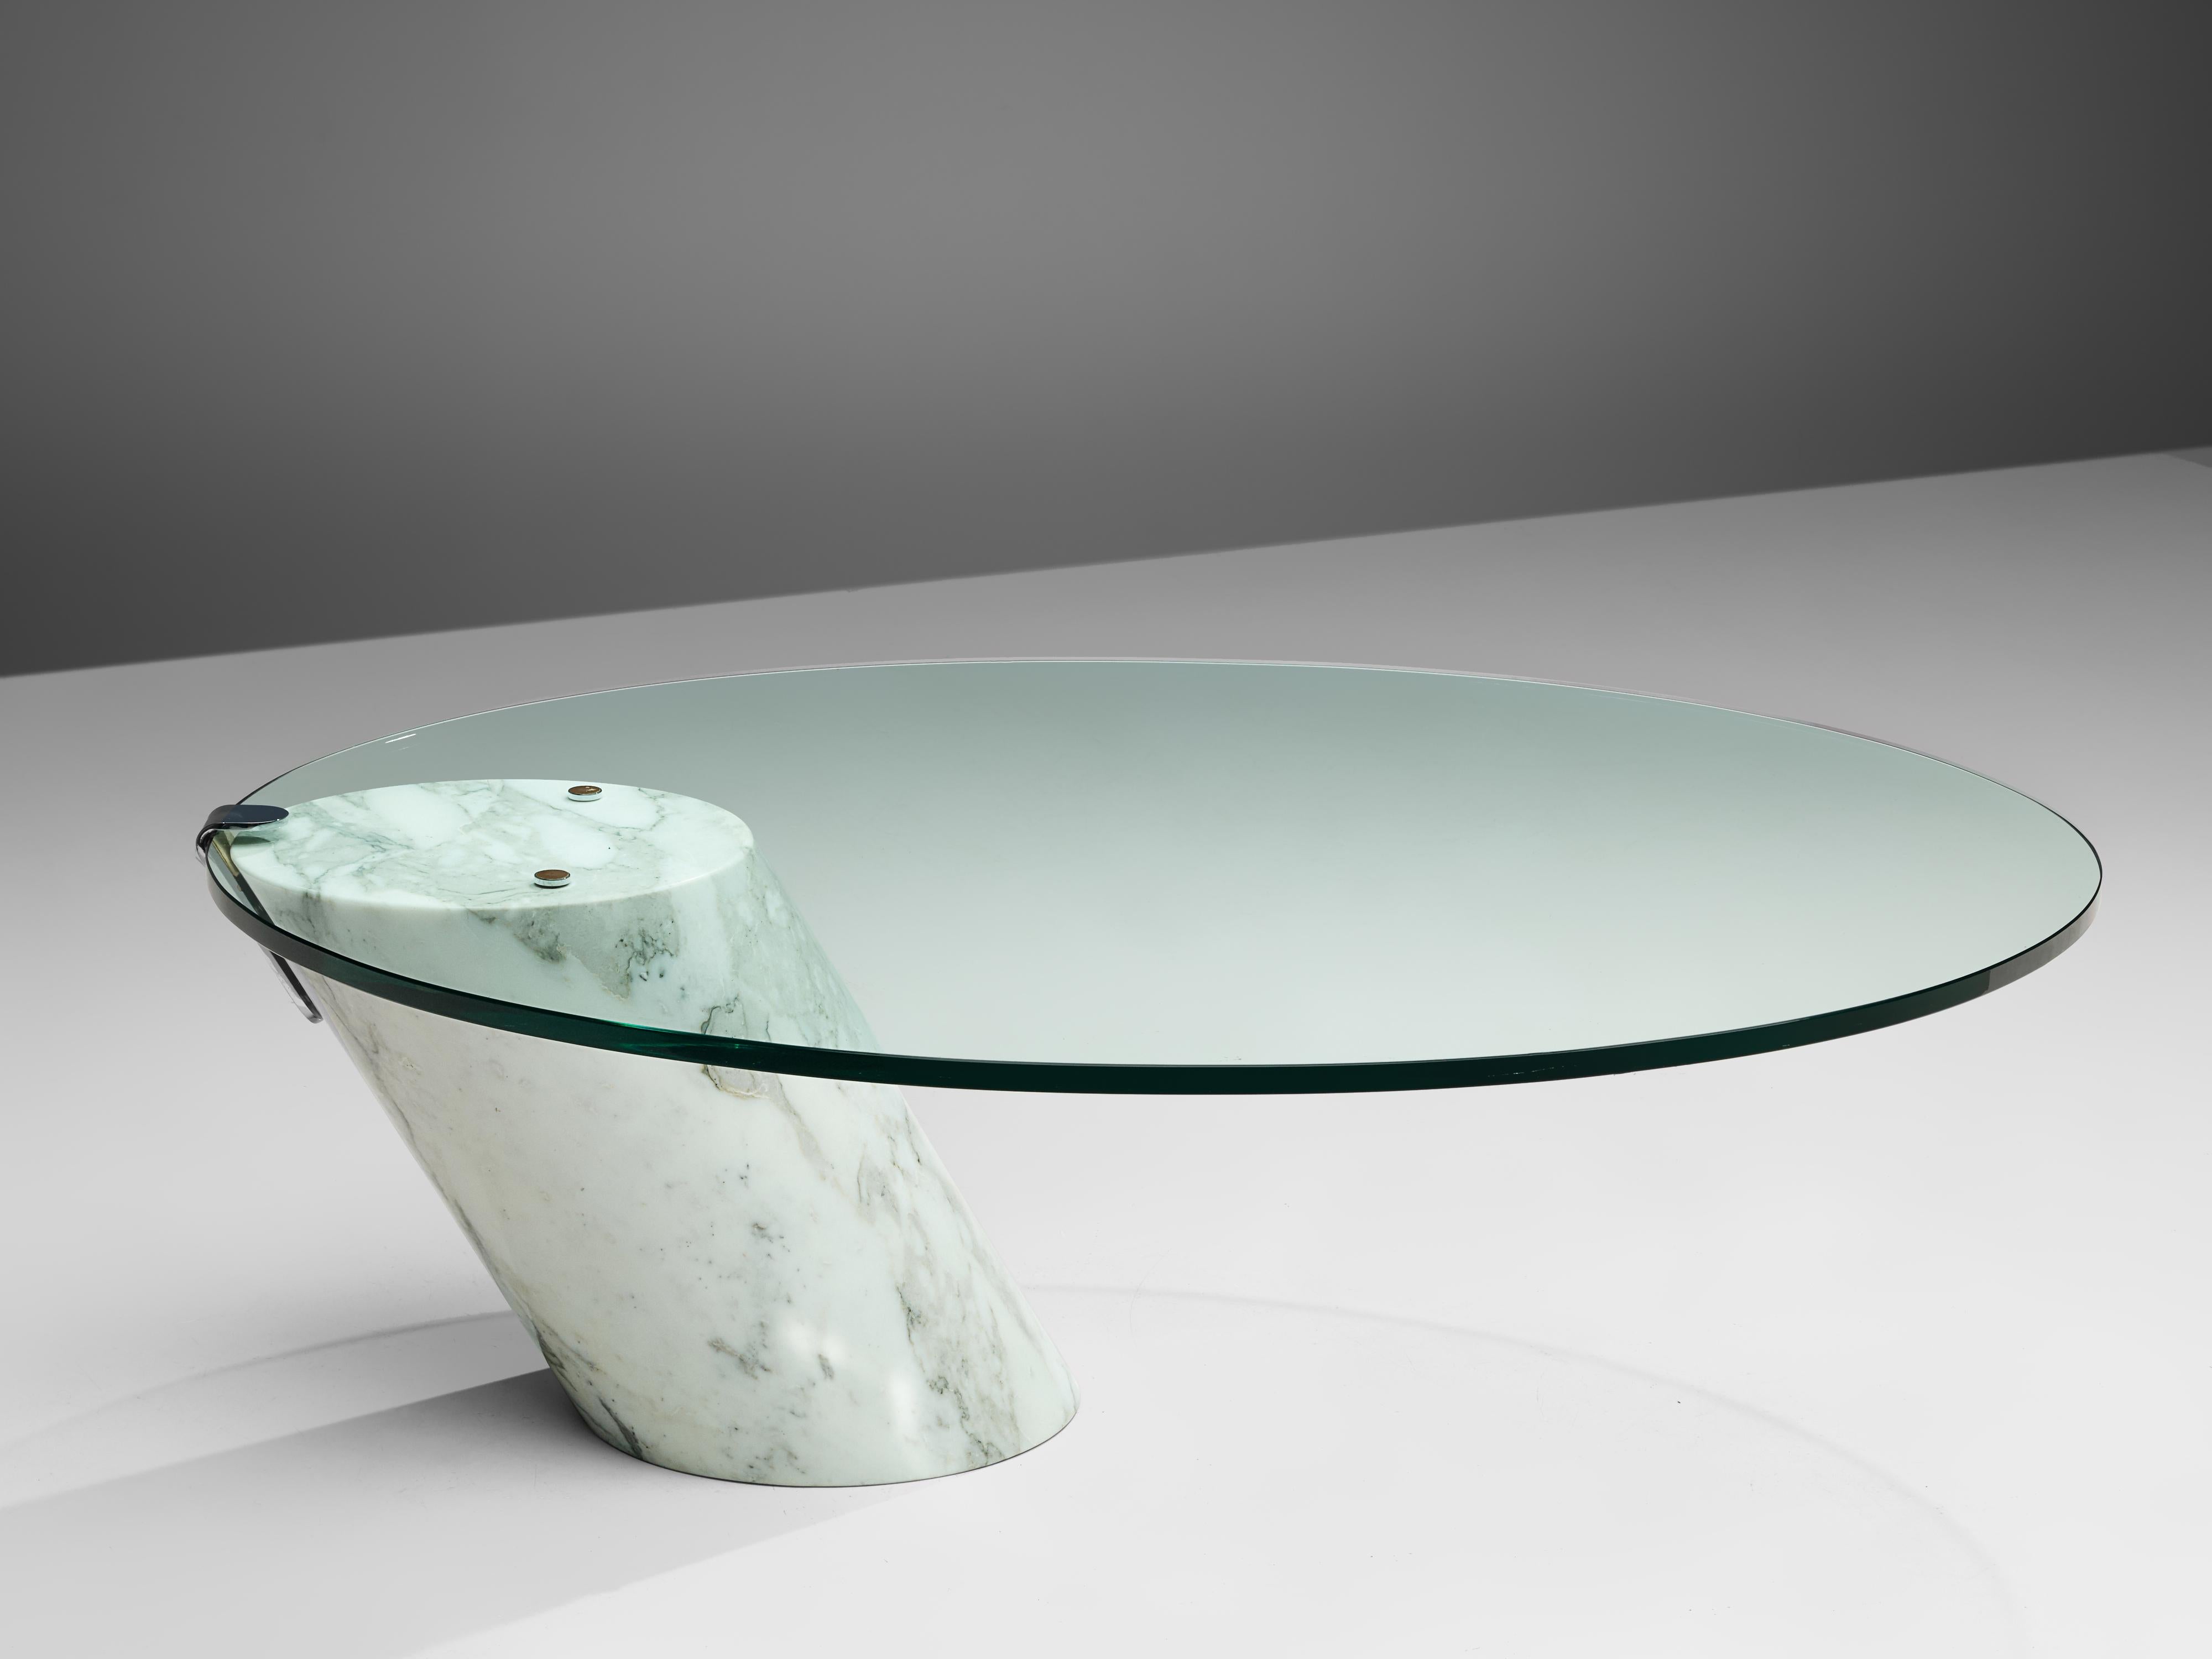 Team Form AG for Ronald Schmitt, coffee table model 'K1000', marble and glass, Switzerland, circa 1974. 

This beautifully constructed cocktail table is made of a solid Carrara marble base with a clear glass top. The oval top is attached to the